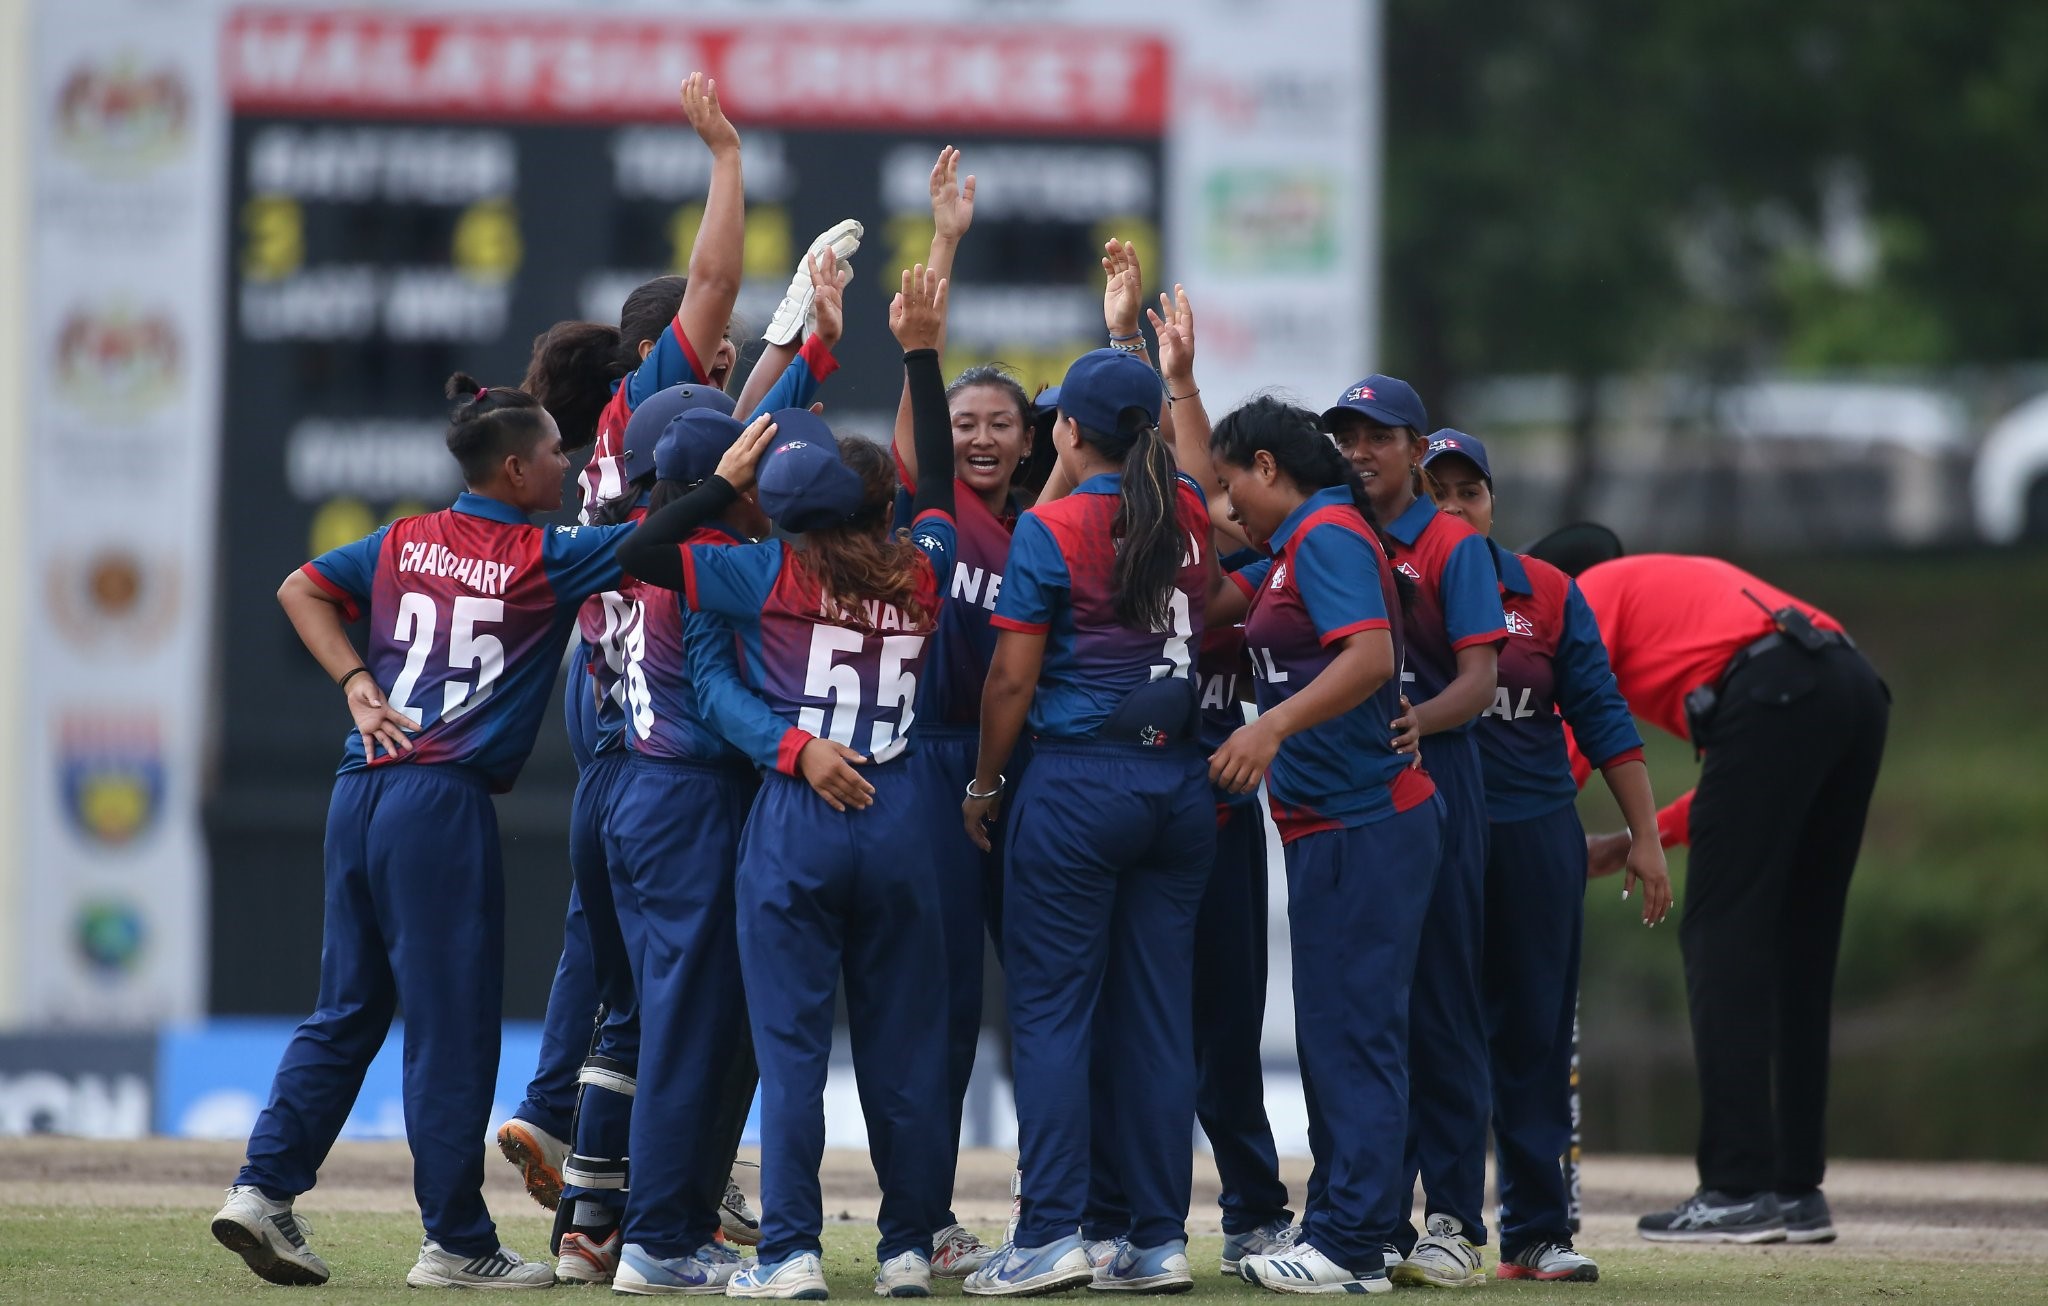 Nepal eliminated from ACC Women’s T20 Championship as rain intervenes